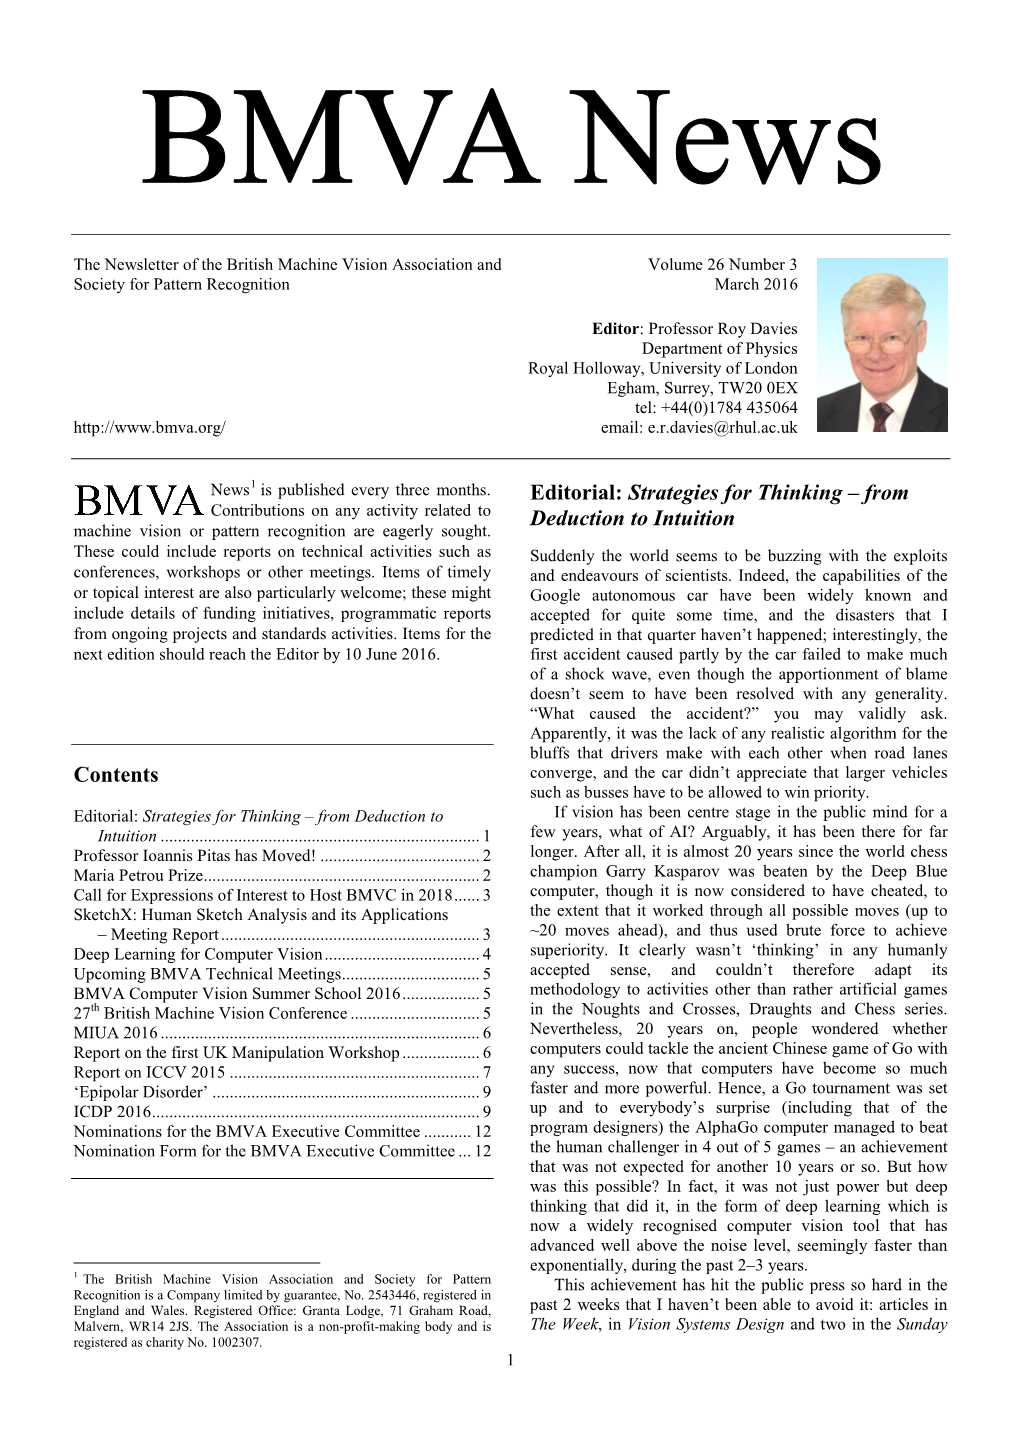 BMVA News Volume 26 Number 3 Times Came to My Notice: All Had Their Own Slant on It, and Professor Ioannis Pitas Has Moved! None Spouted Bad Science Or Hysteria